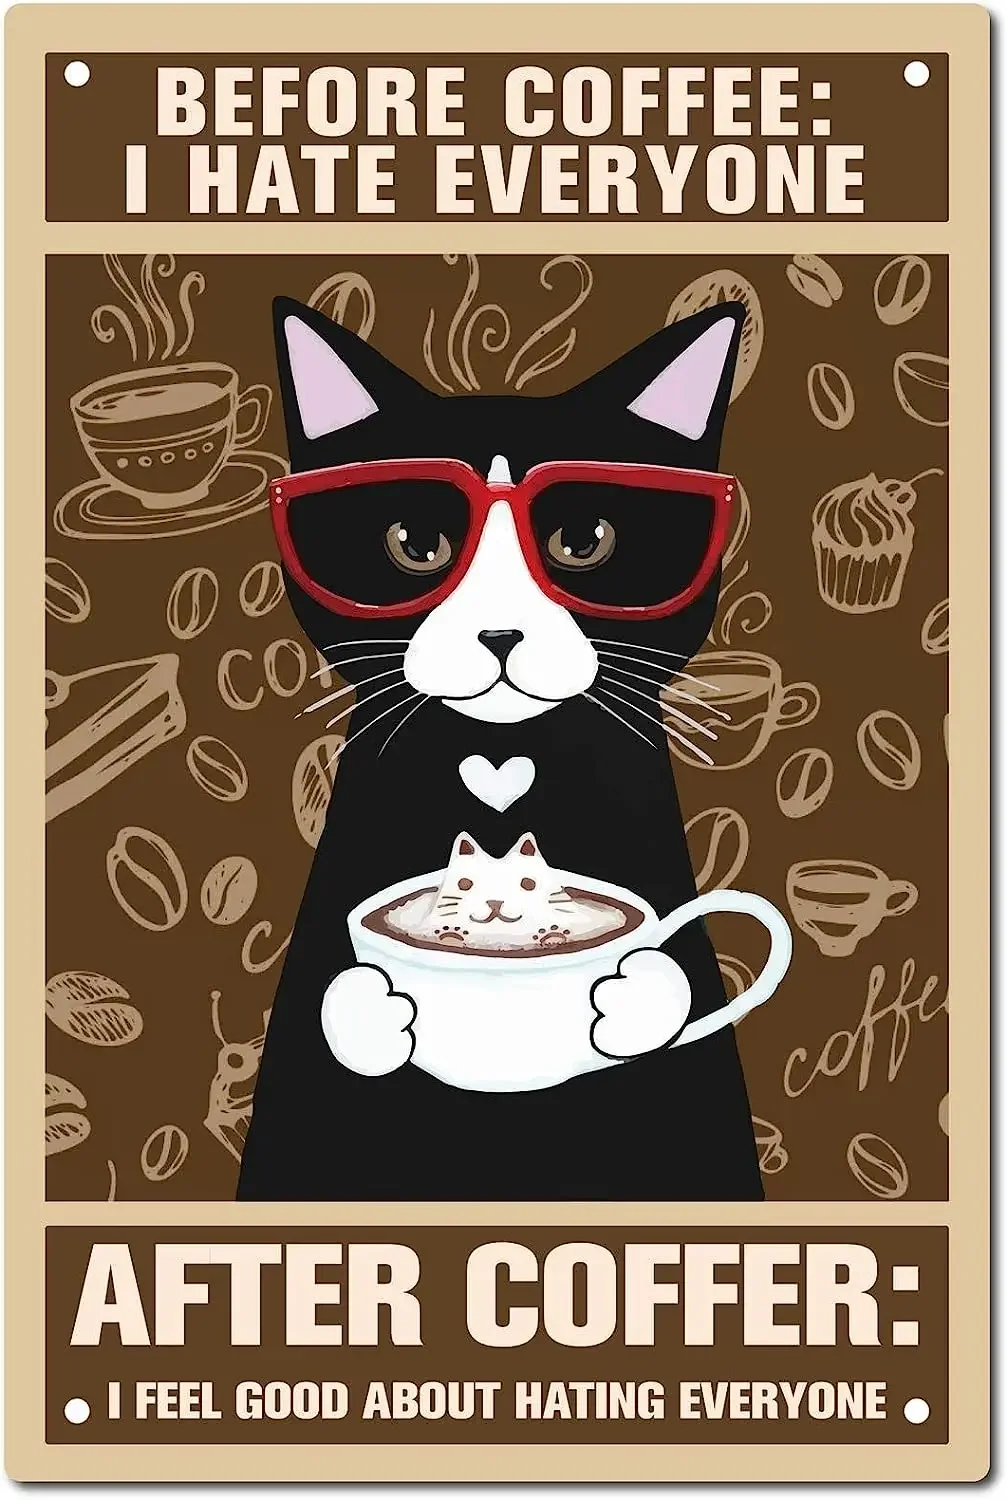 

Funny Cat Coffee Tin Signs Metal Sign Vintage Plaque Poster Wall Art for Restroom Decor Home Bar Pub Cafe Shop